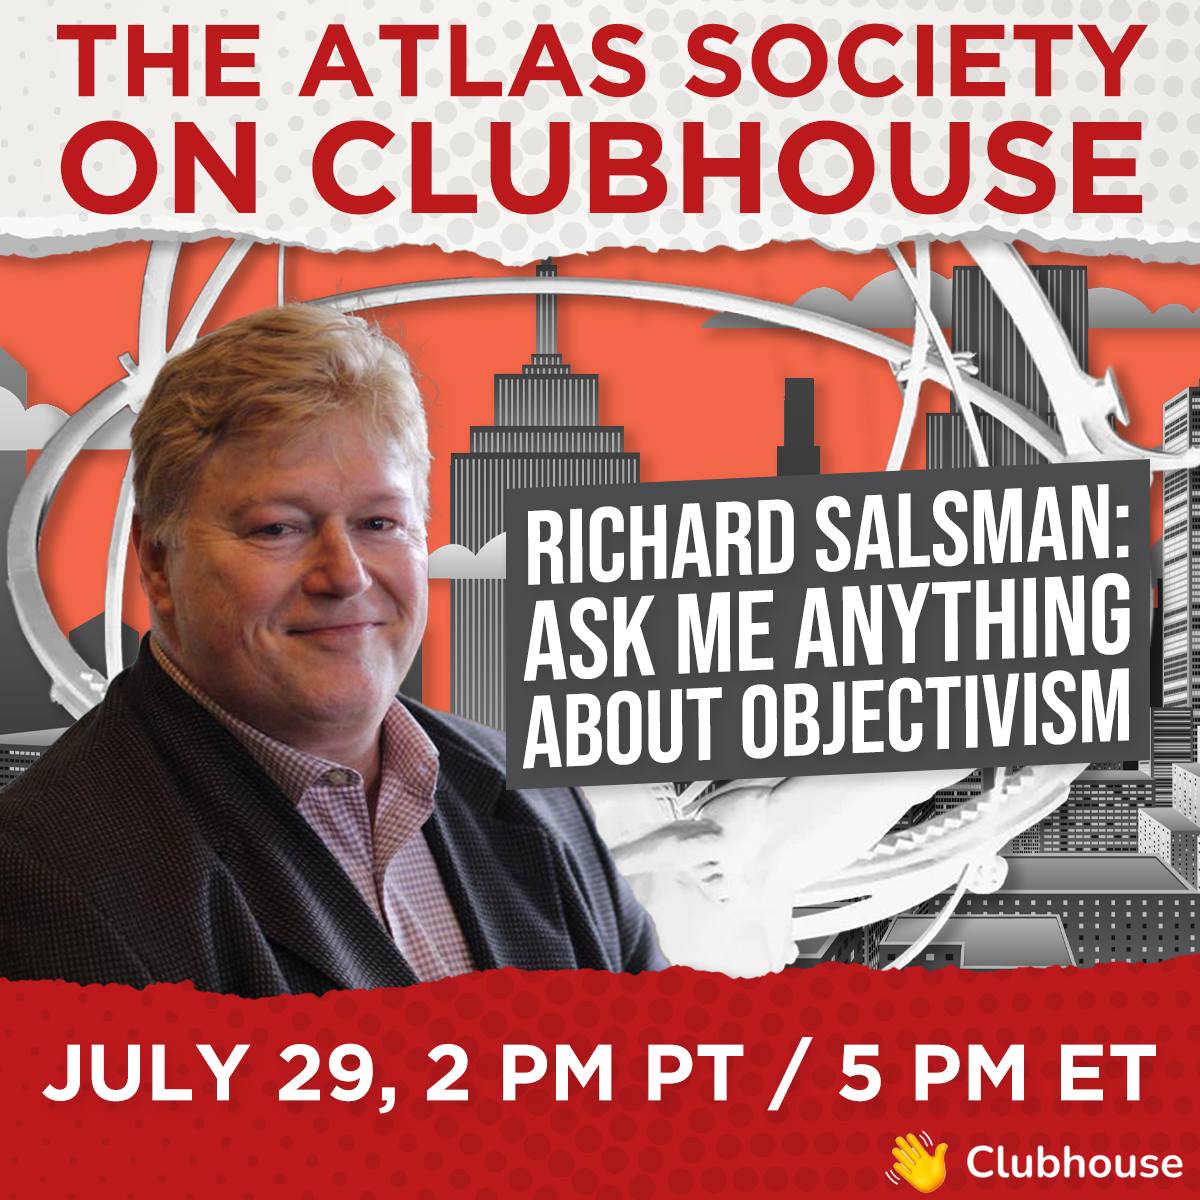 Richard Salsman - Ask Me Anything About Objectivism